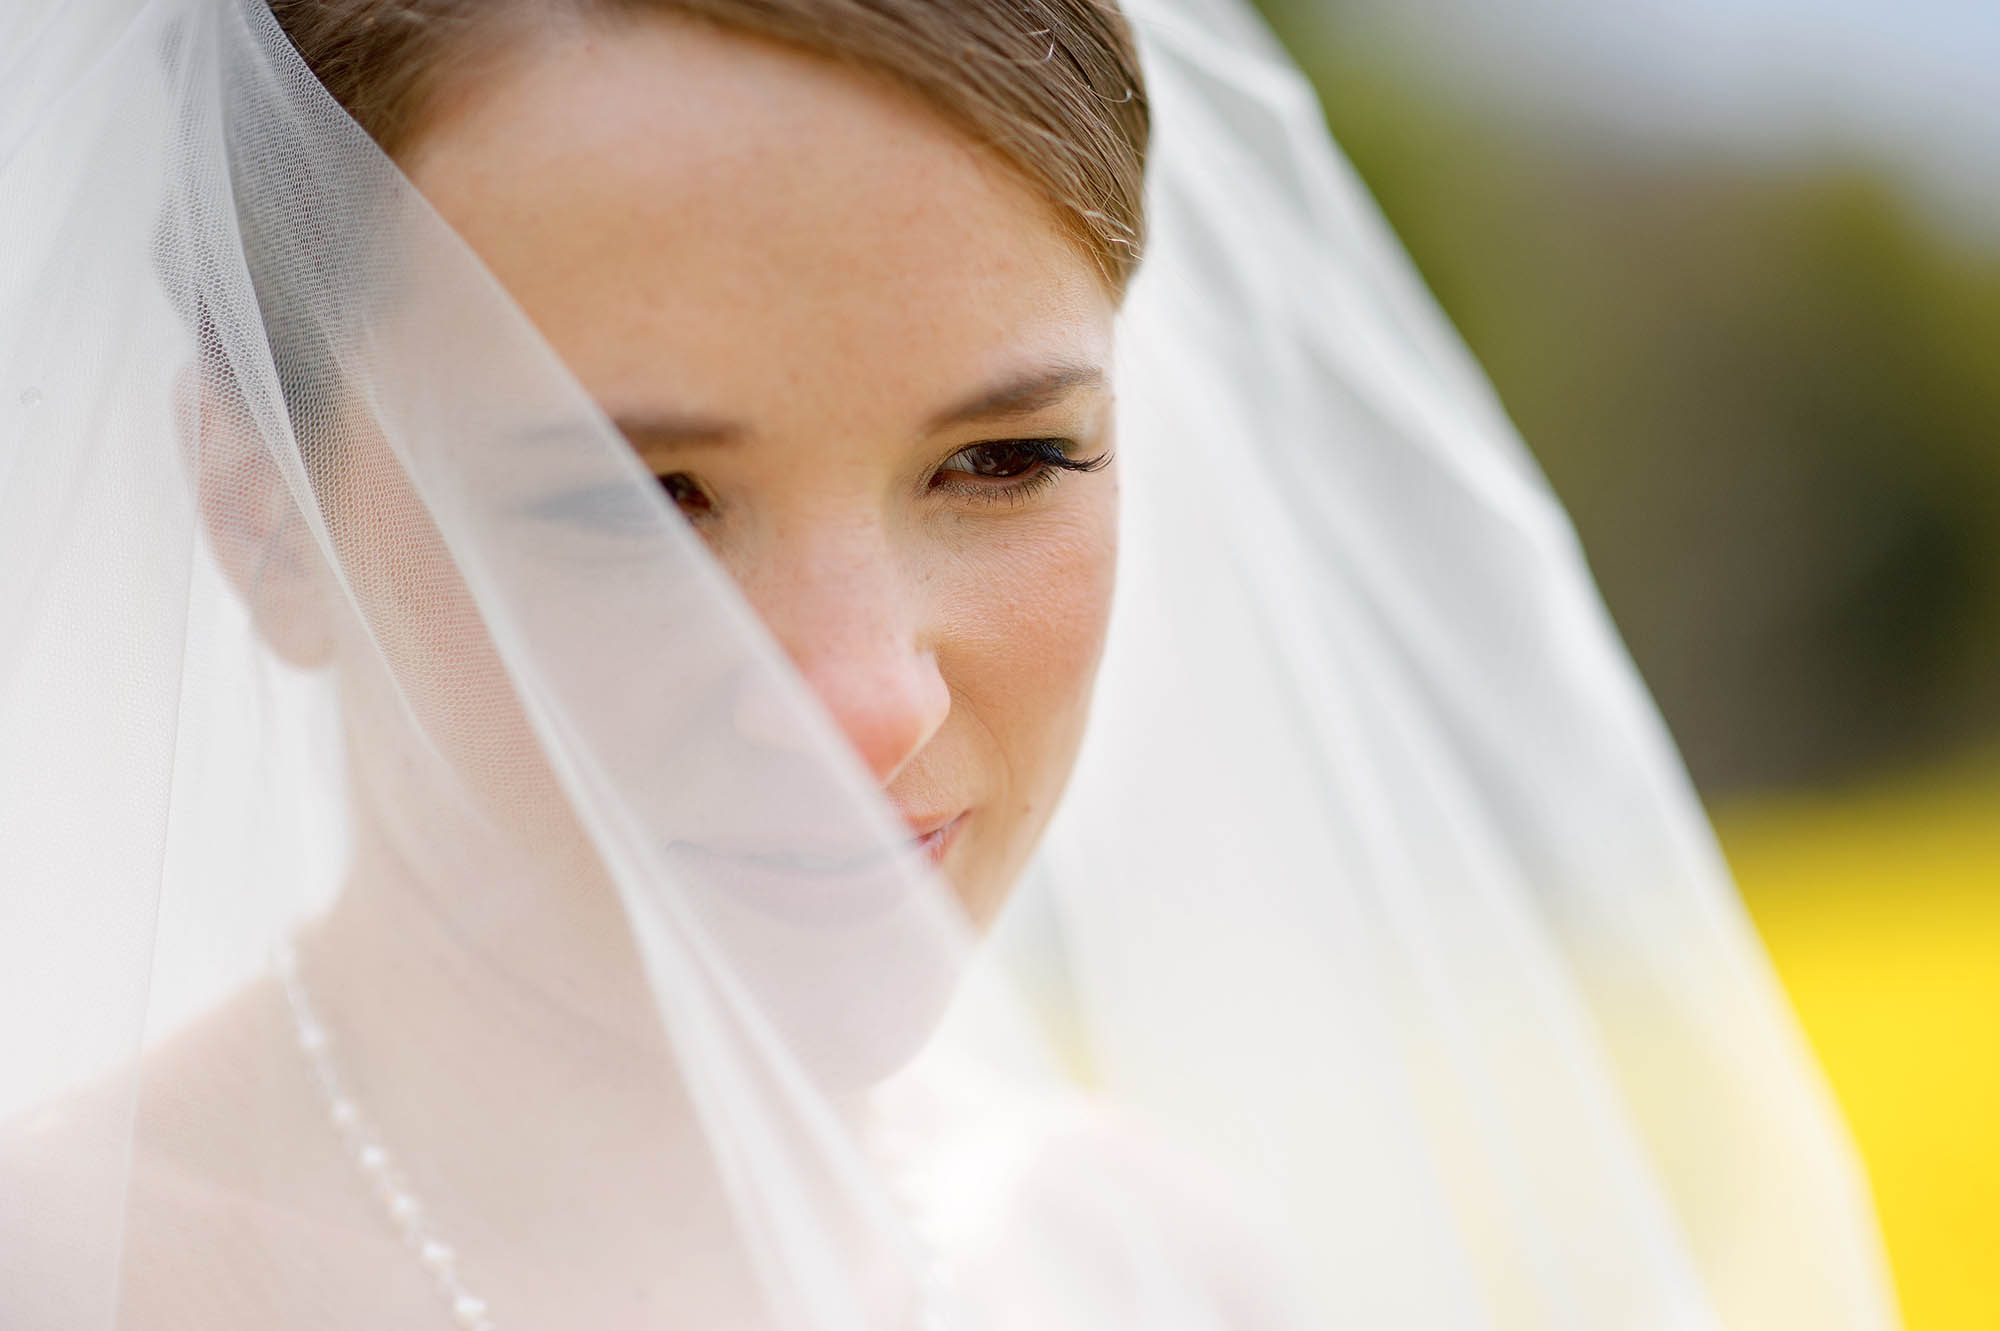 Close up of a bride with her veil partially covering her face - Sheffield wedding photographer John Mottershaw